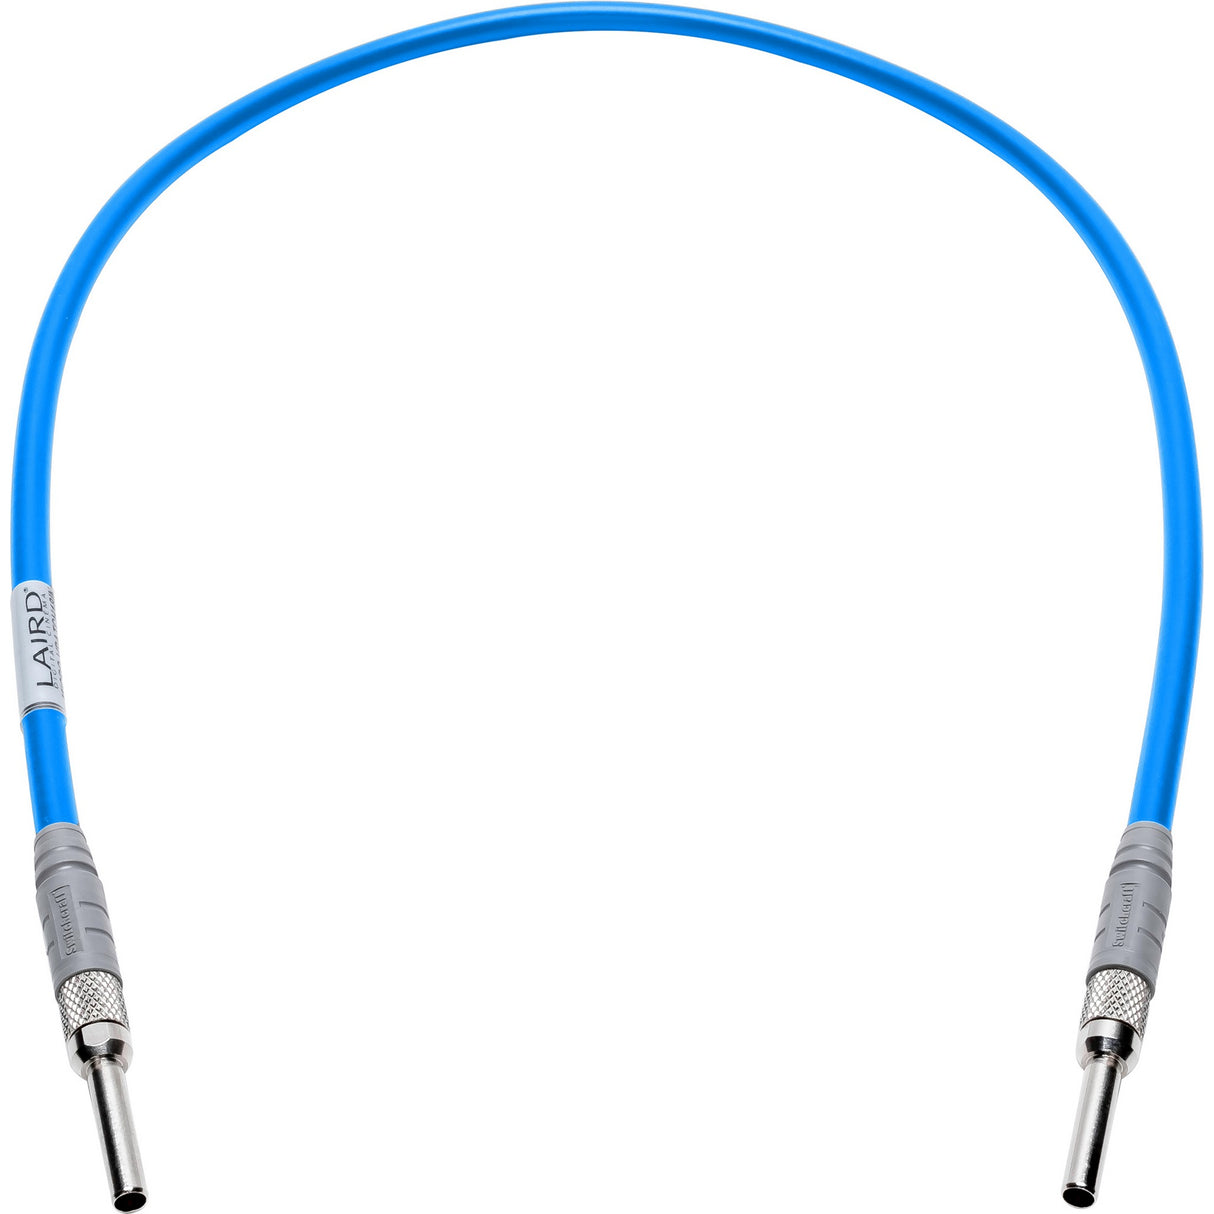 Laird MICRO-VPATCH-18IBE 12G-SDI Micro Video Patch Cable, Light Blue, 18-Inch